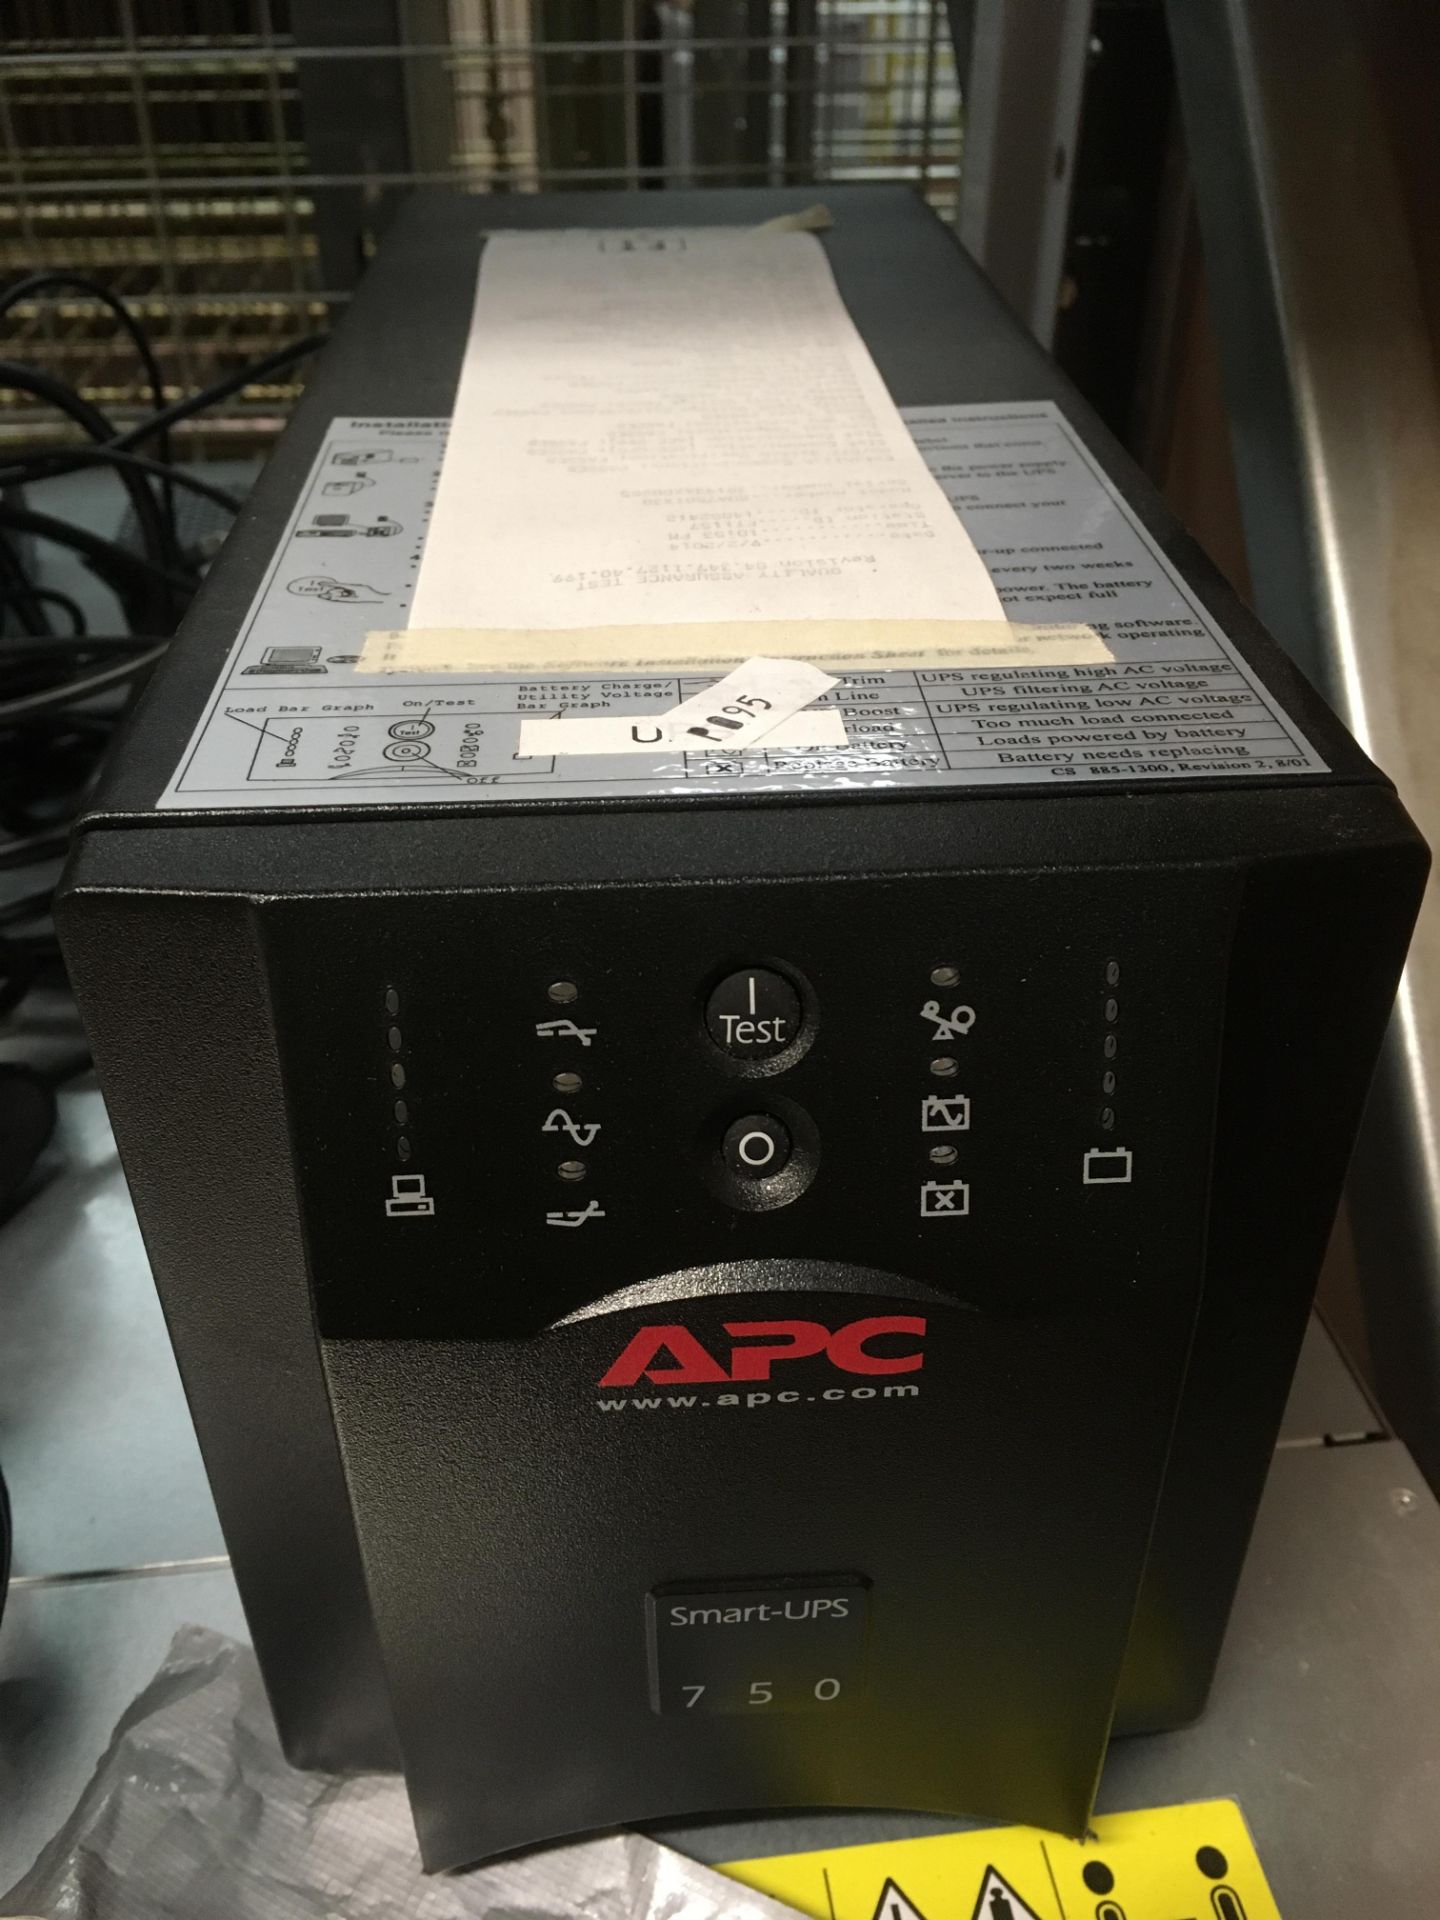 APC Smart-UPS 750 battery backup unit complete with power adaptor